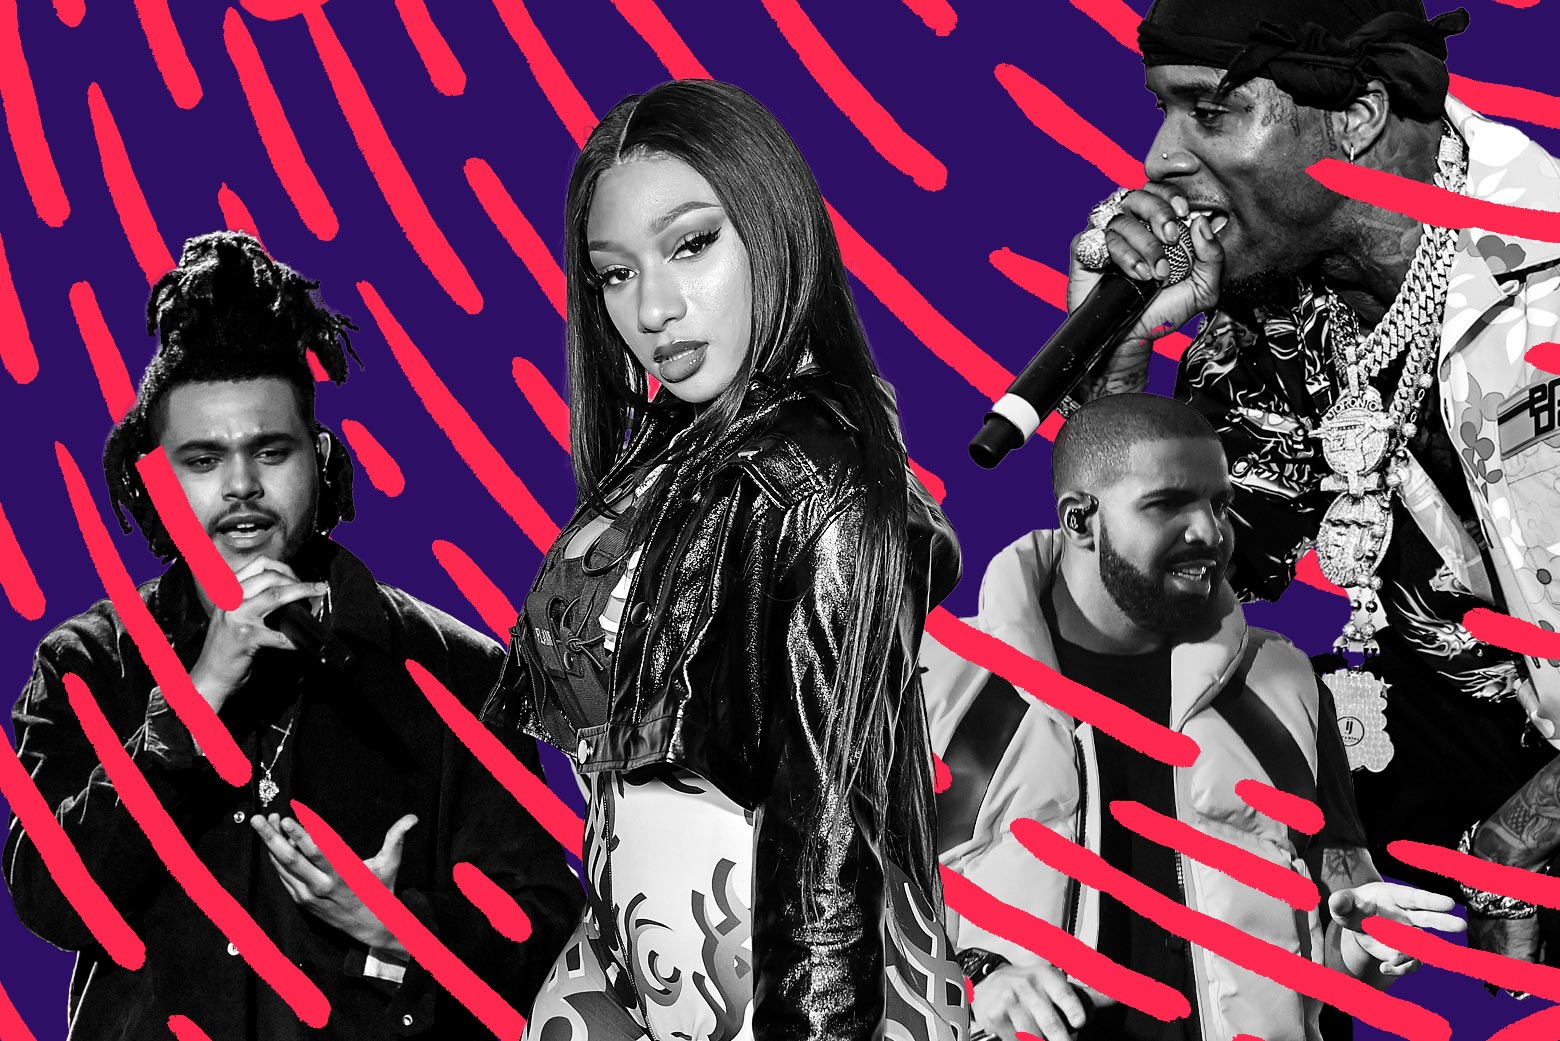 The Waves: We Can’t Forgive Drake For What He Did to Megan Thee Stallion Scaachi Koul